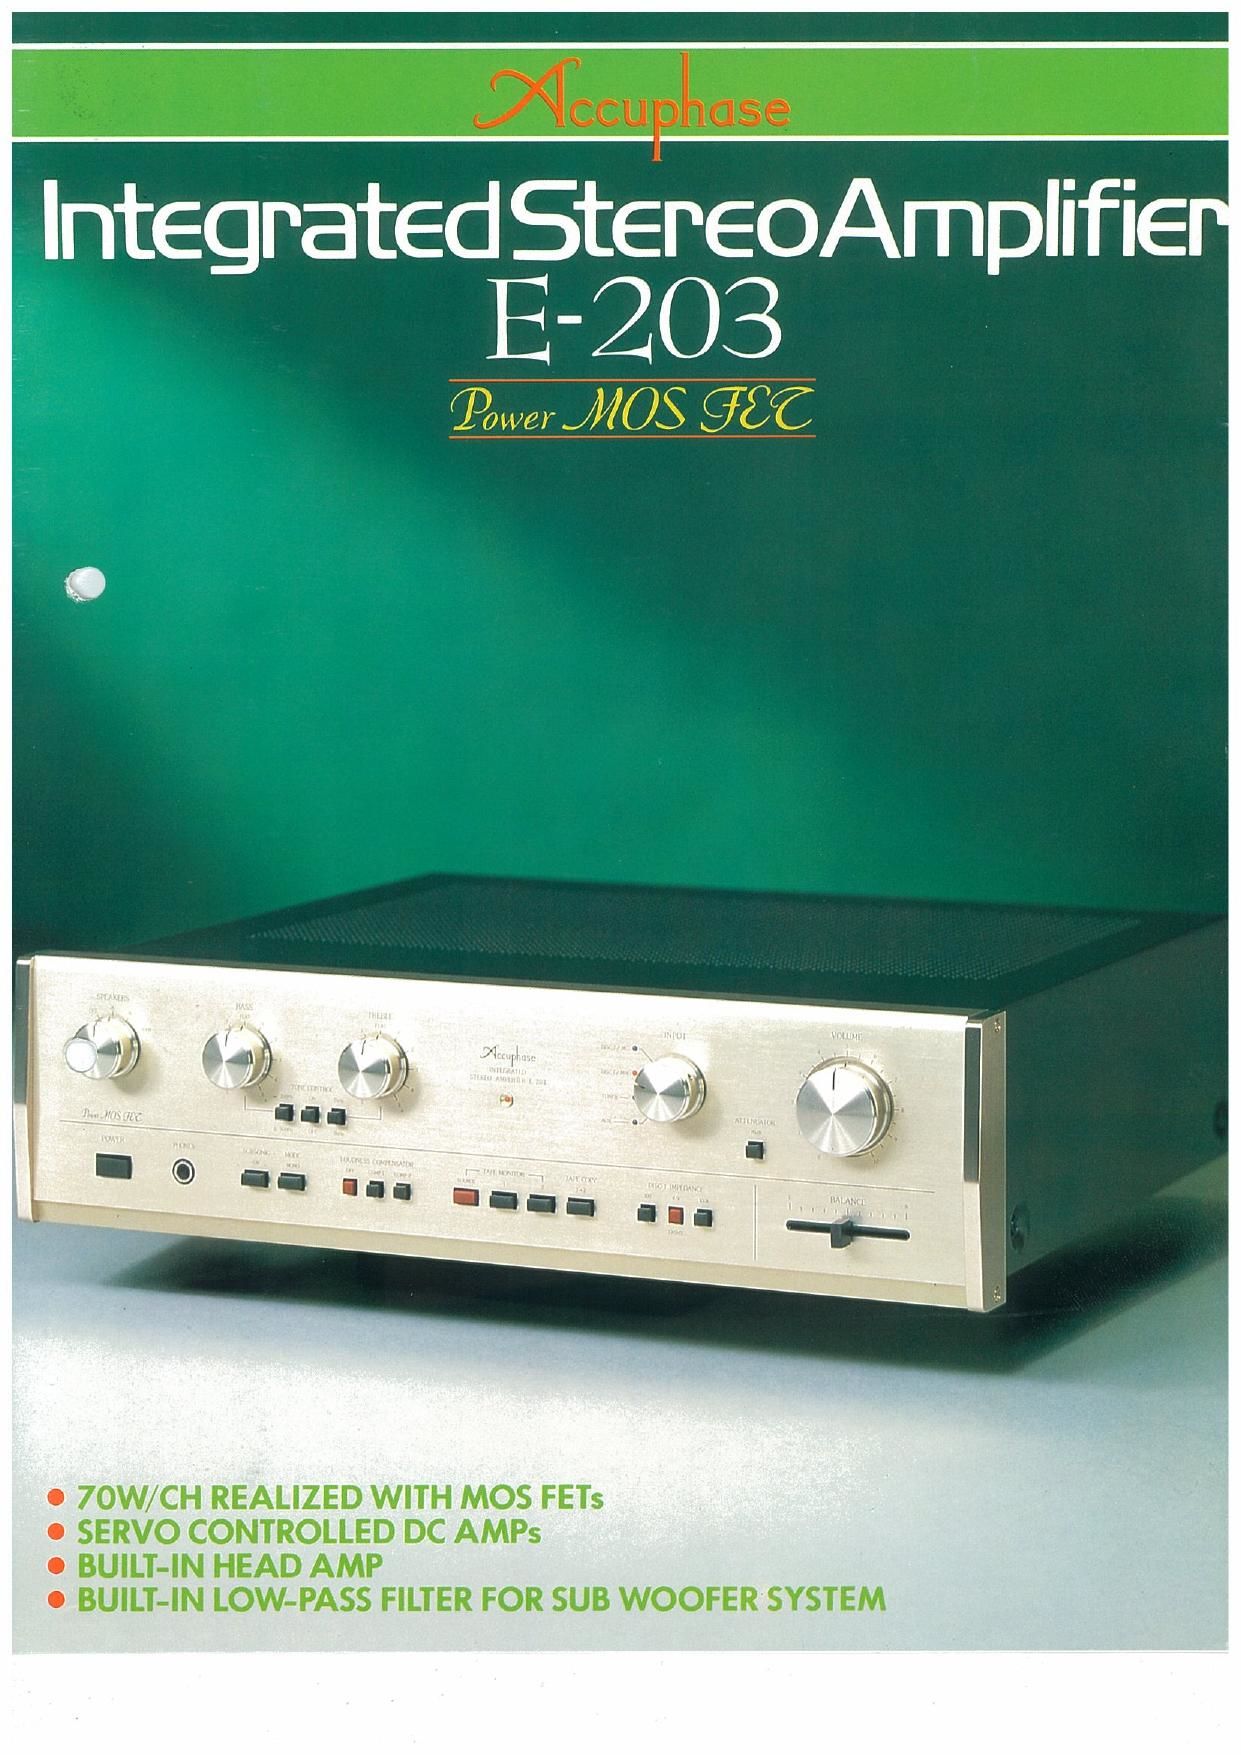 Accuphase E 203 ad